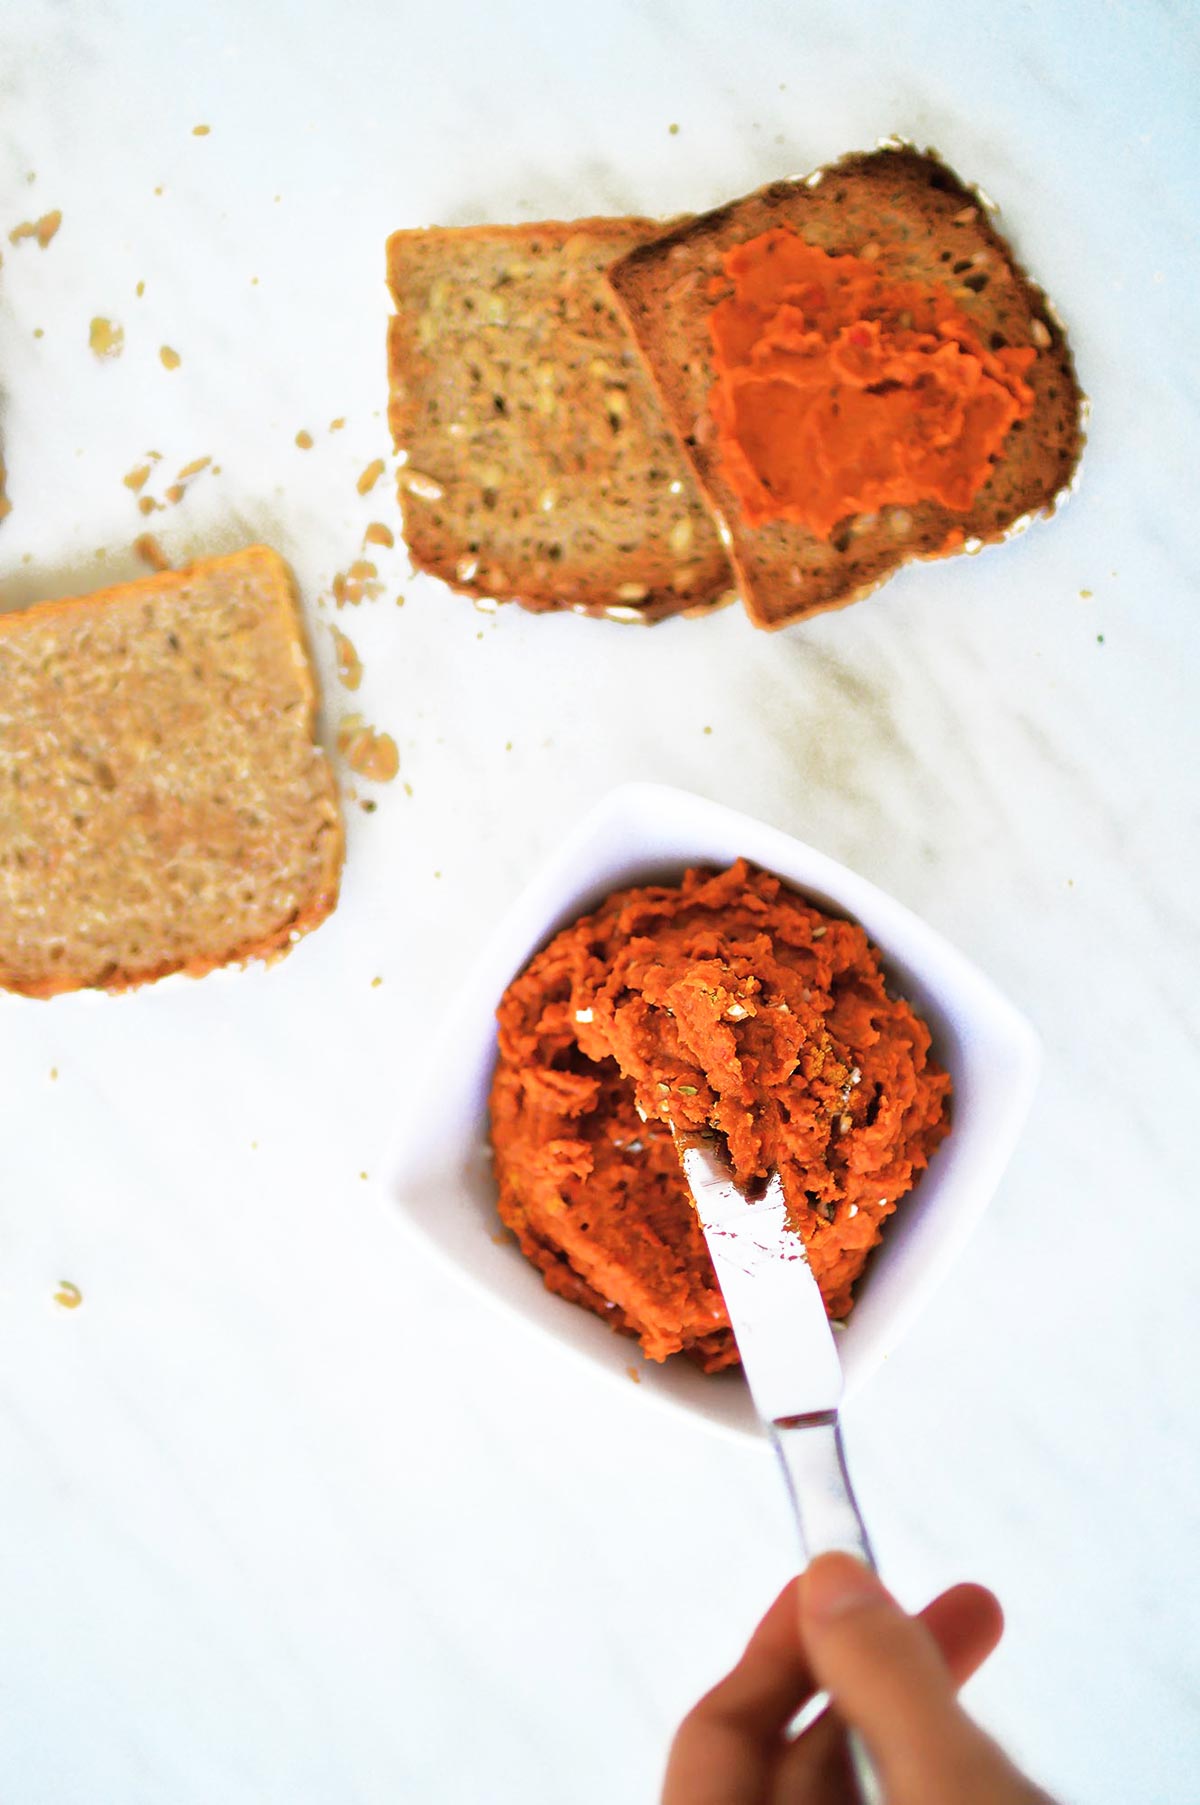 Roasted red bell pepper hummus on bread